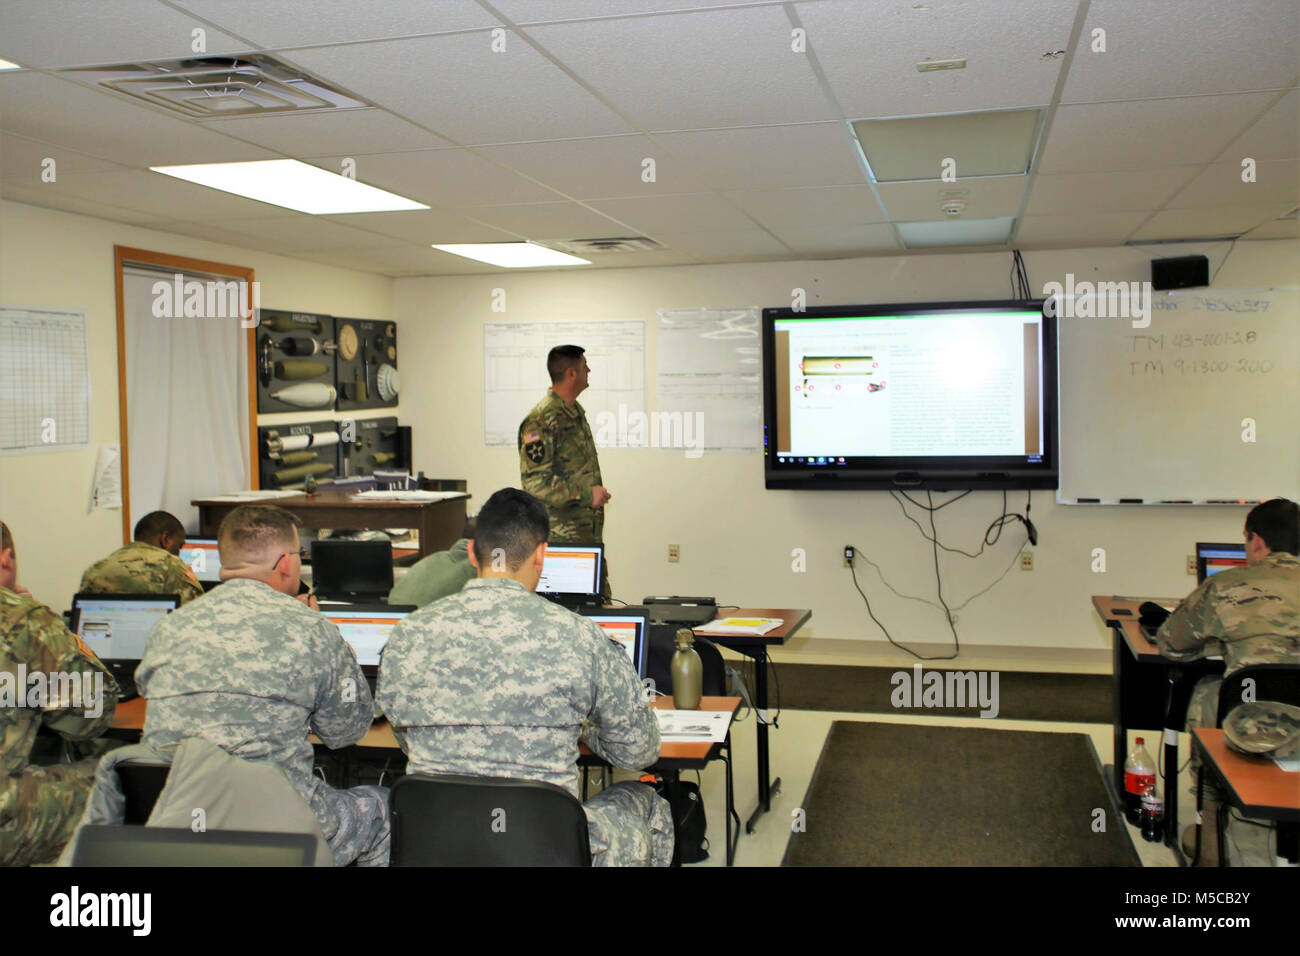 Instructor Sgt. 1st Class Jeremy VanStreain with the 13th Battalion, 100th Regiment teaches students in the 89B Ammunition Supply Course on Jan. 16, 2018, at Fort McCoy, Wis. The 13th, 100th is an ordnance battalion that provides training and training support to Soldiers in the ordnance maintenance military occupational specialty (MOS) series. The unit, aligned under the 3rd Brigade, 94th Division of the 80th Training Command, has been at Fort McCoy since about 1995. (U.S. Army Stock Photo